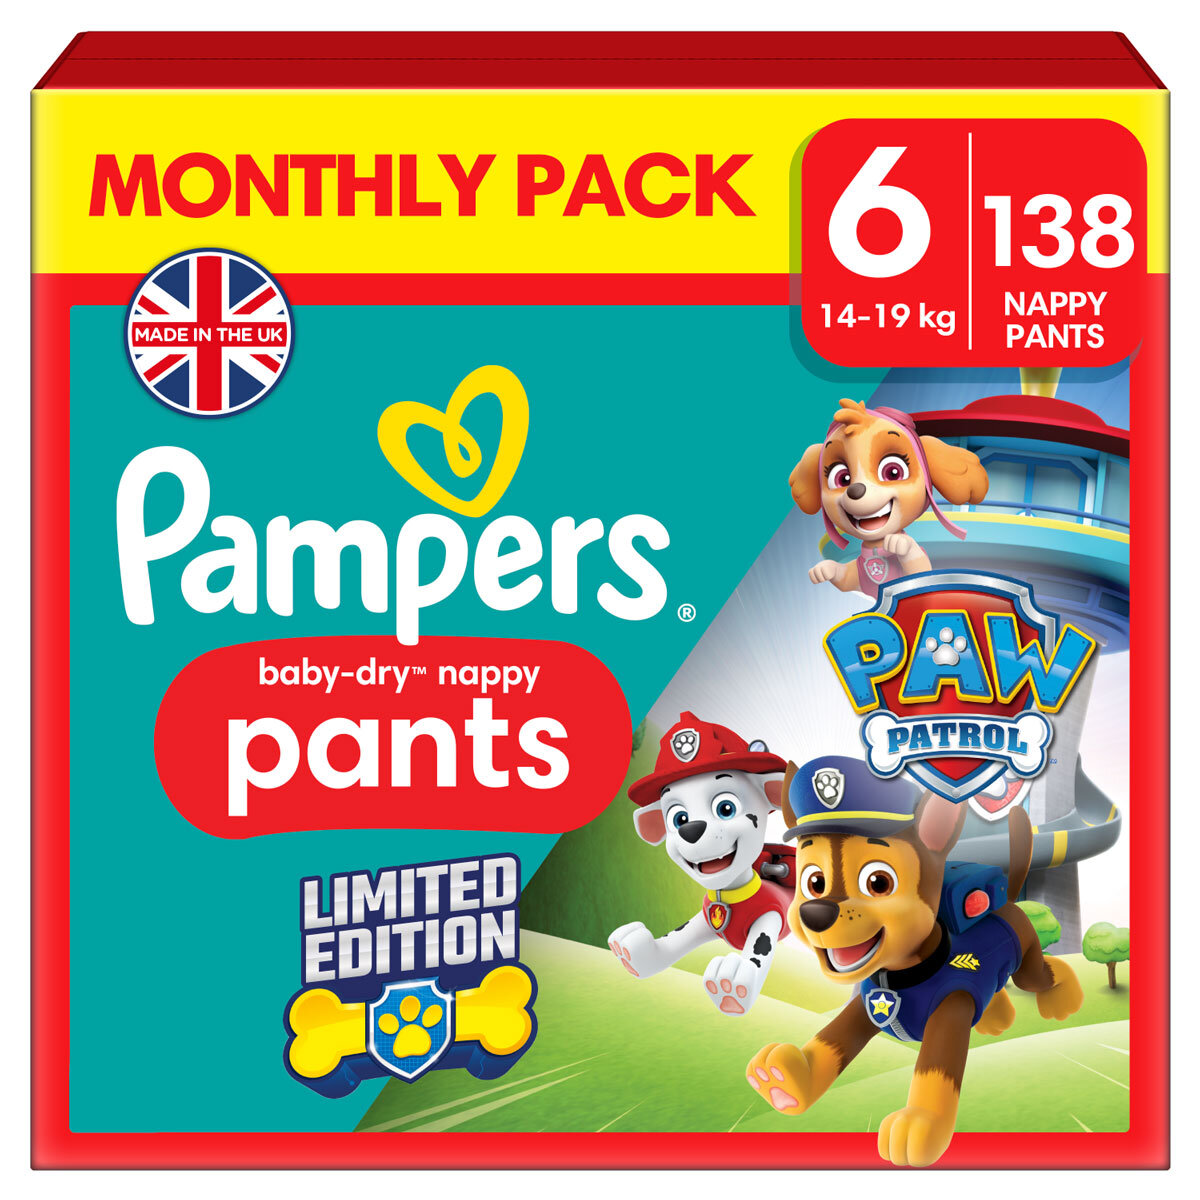 Pampers Paw Patrol Baby Dry Pants Size 6, 138 Pack